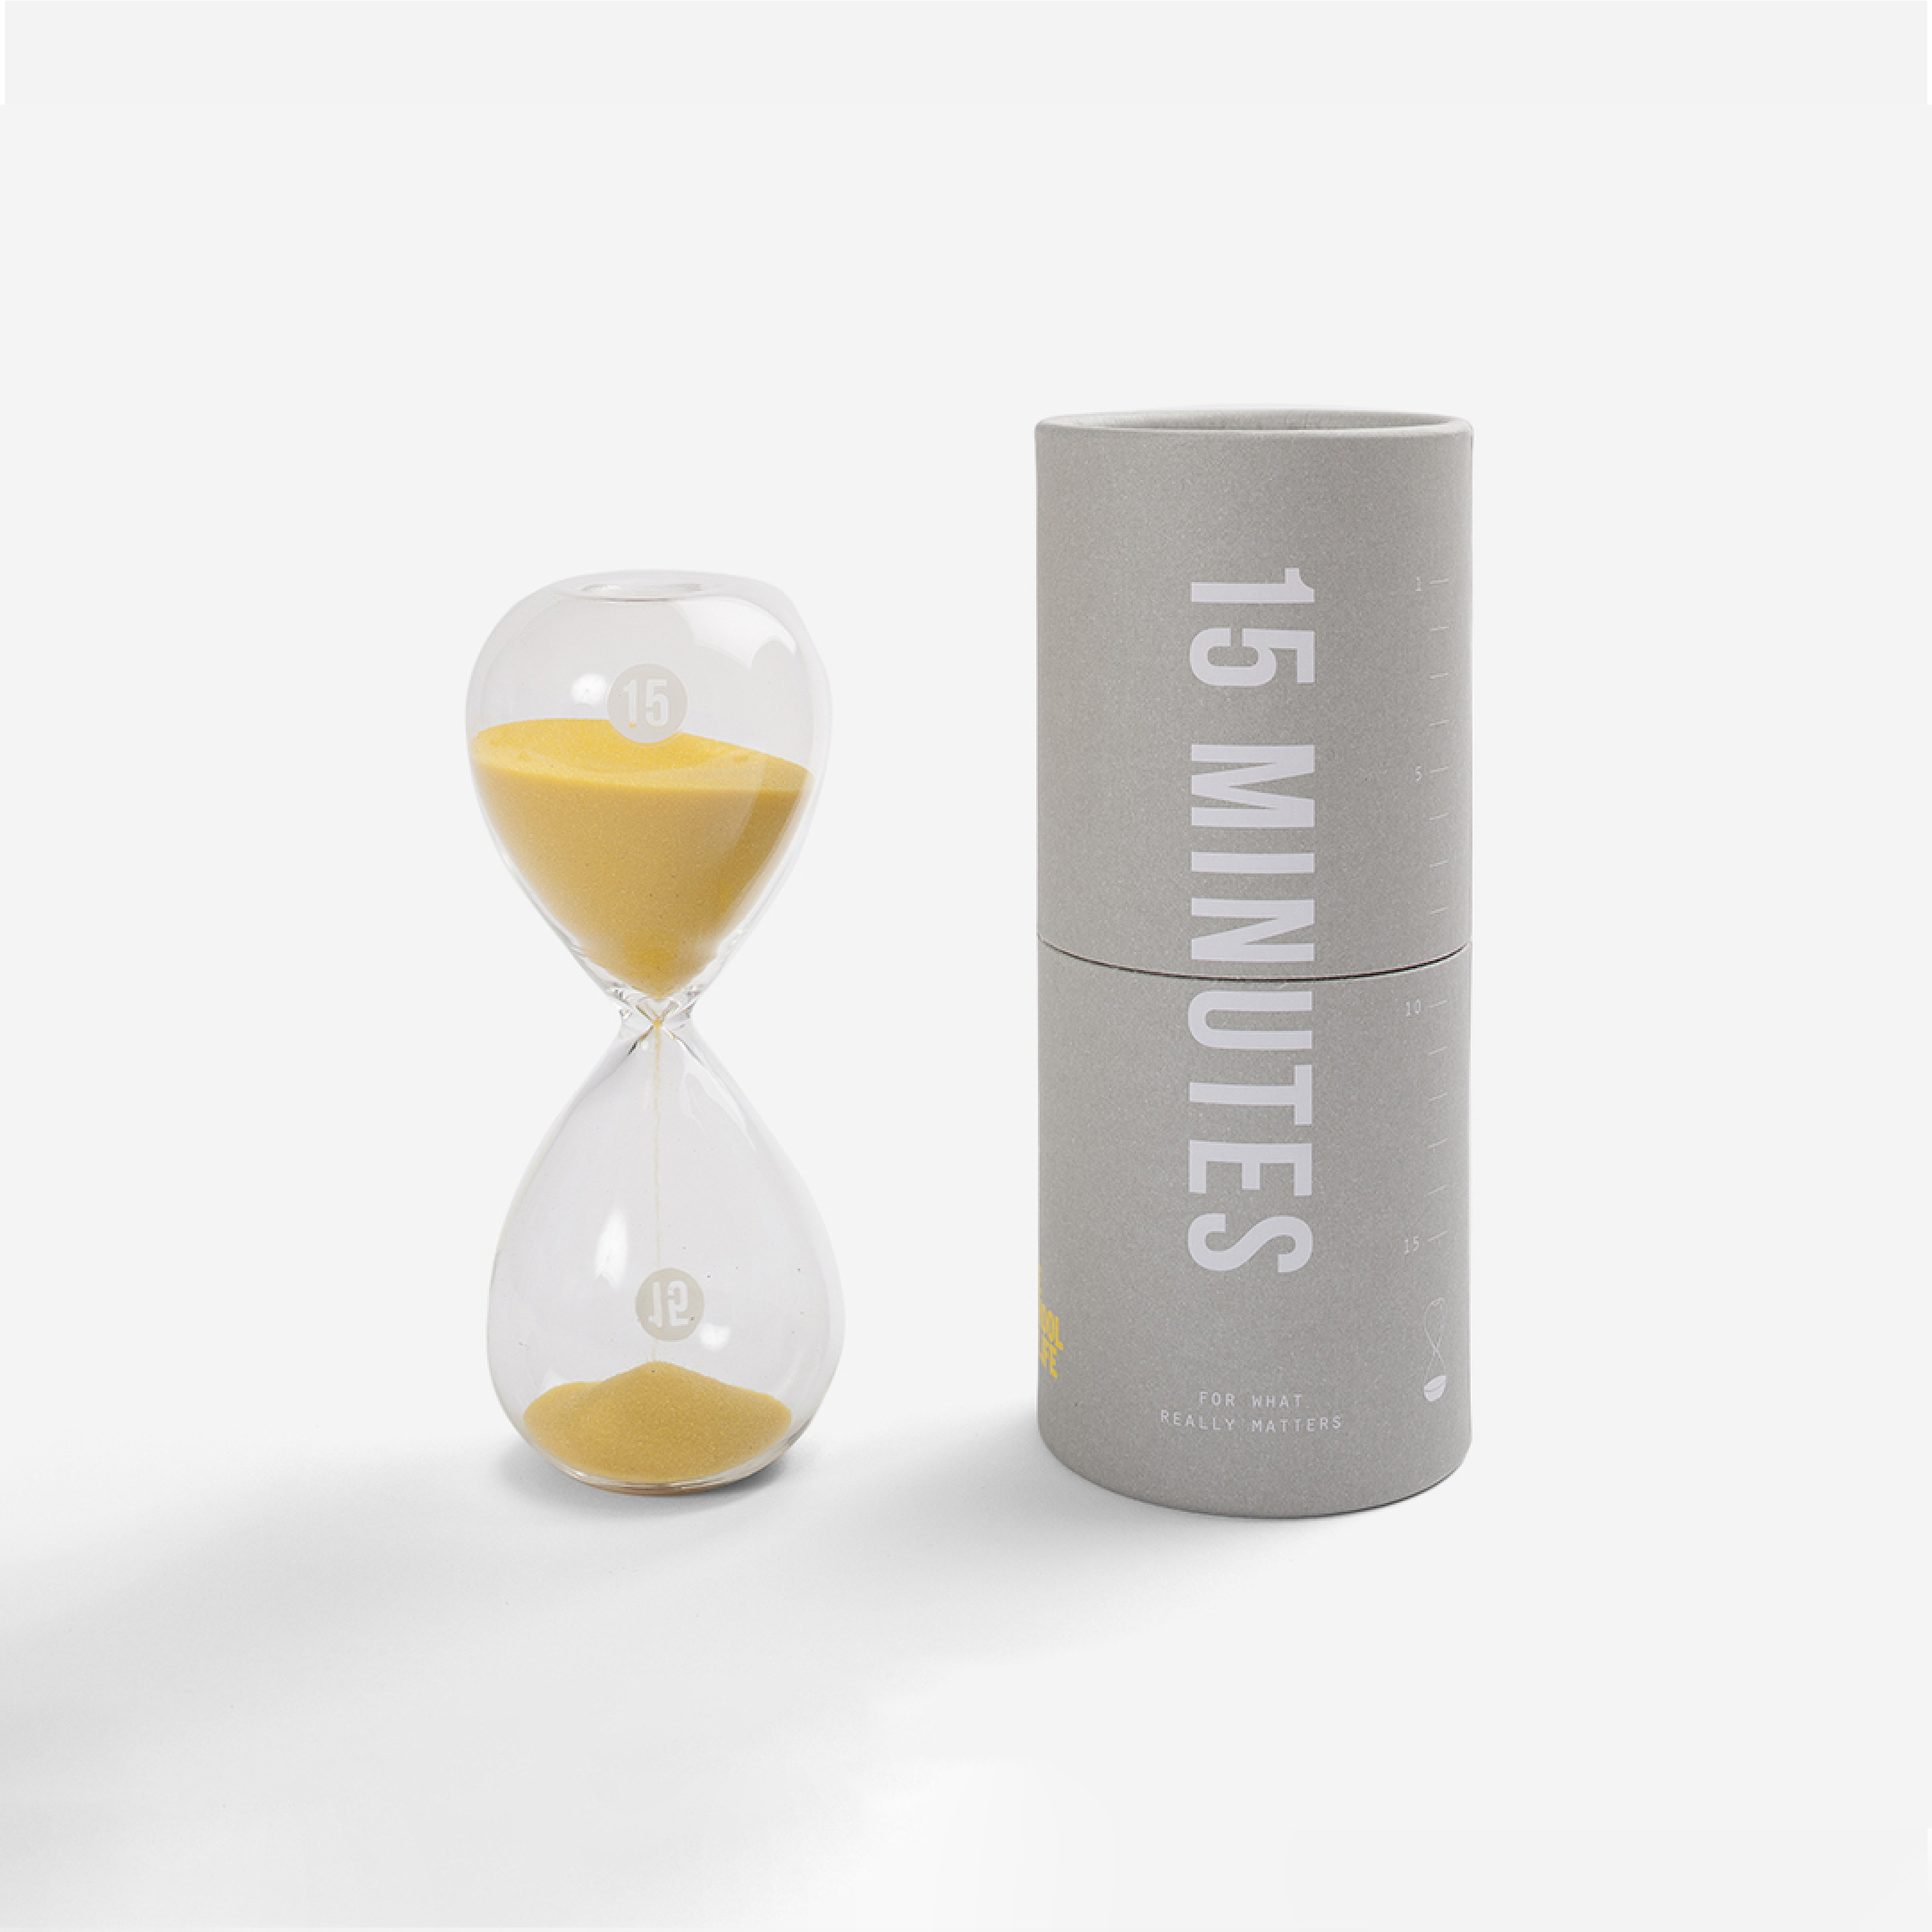 15 Minute Hourglass Timer